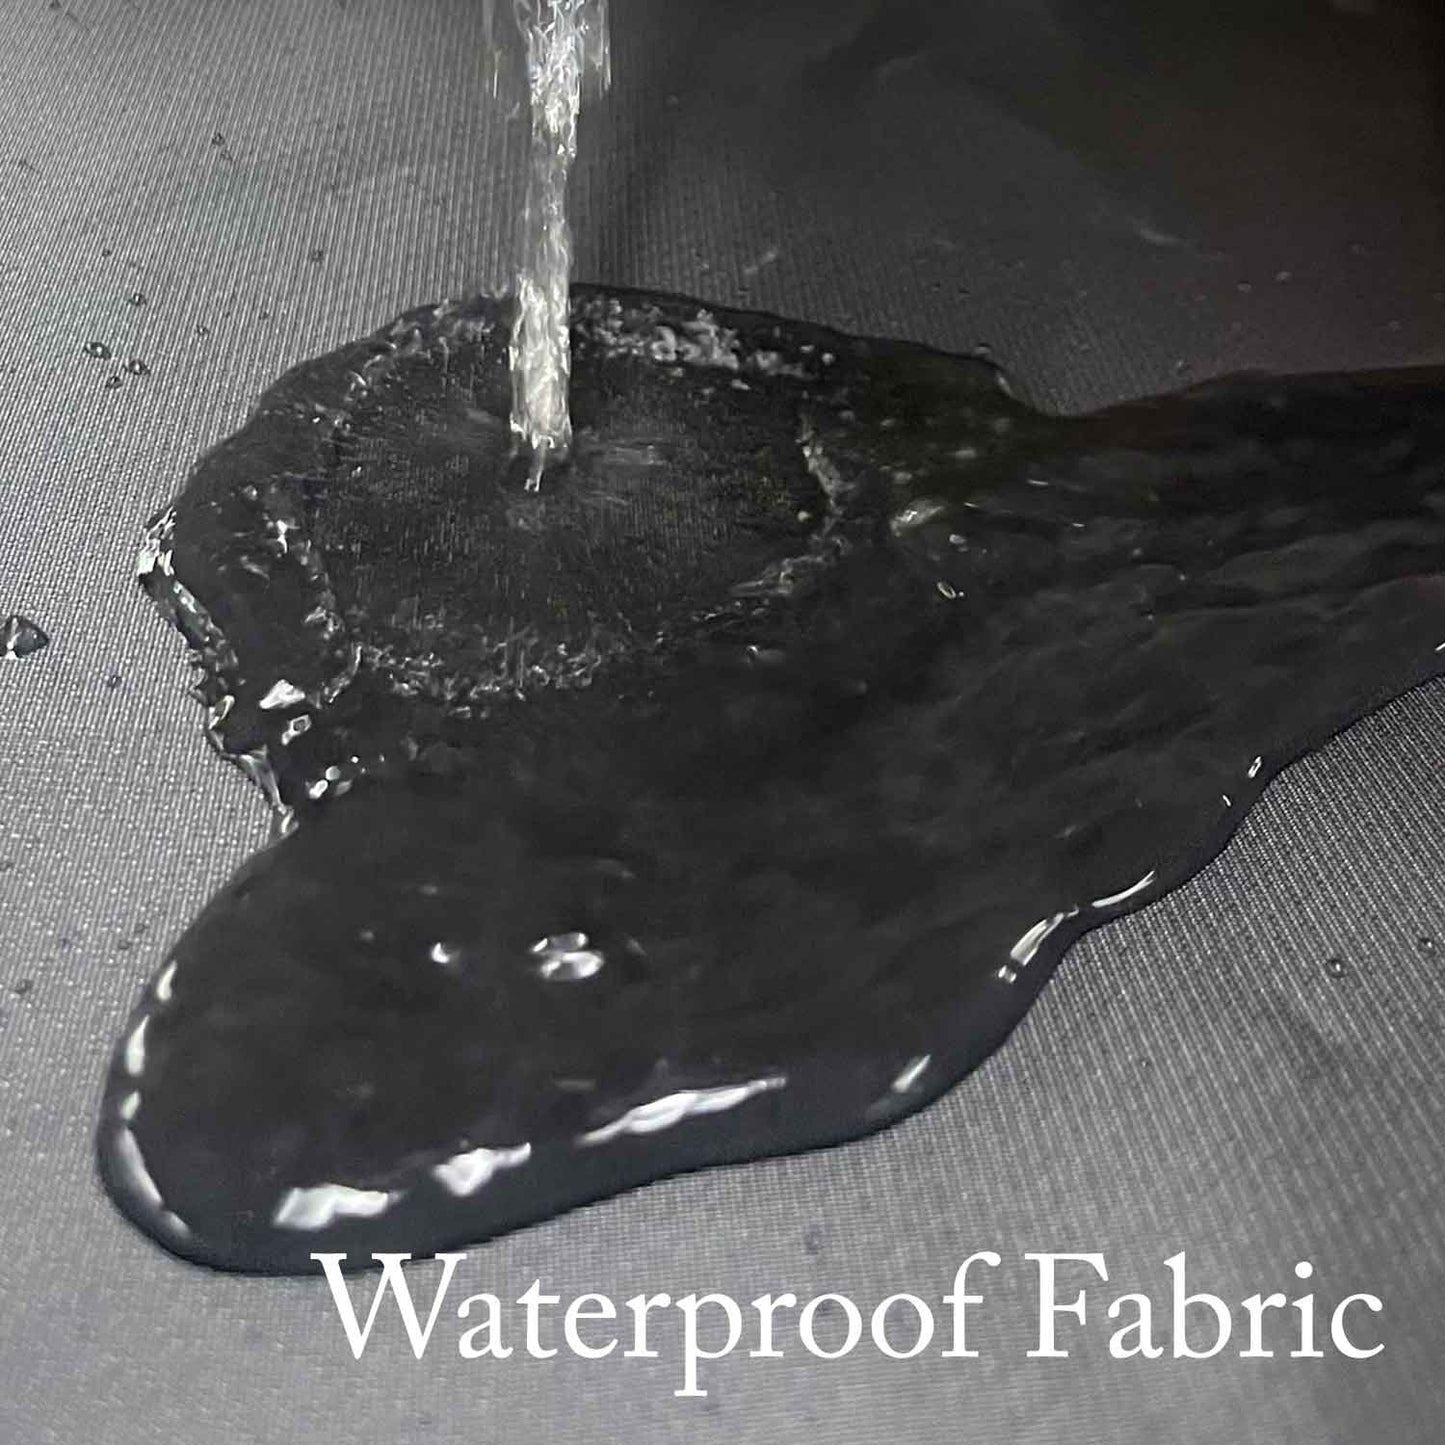 Our wader bag has a single (unbroken) layer of waterproof fabric to keeps mess in - trapping water, mud, sand, dirt, and other grime in the bag to help keep your vehicle cleaner.